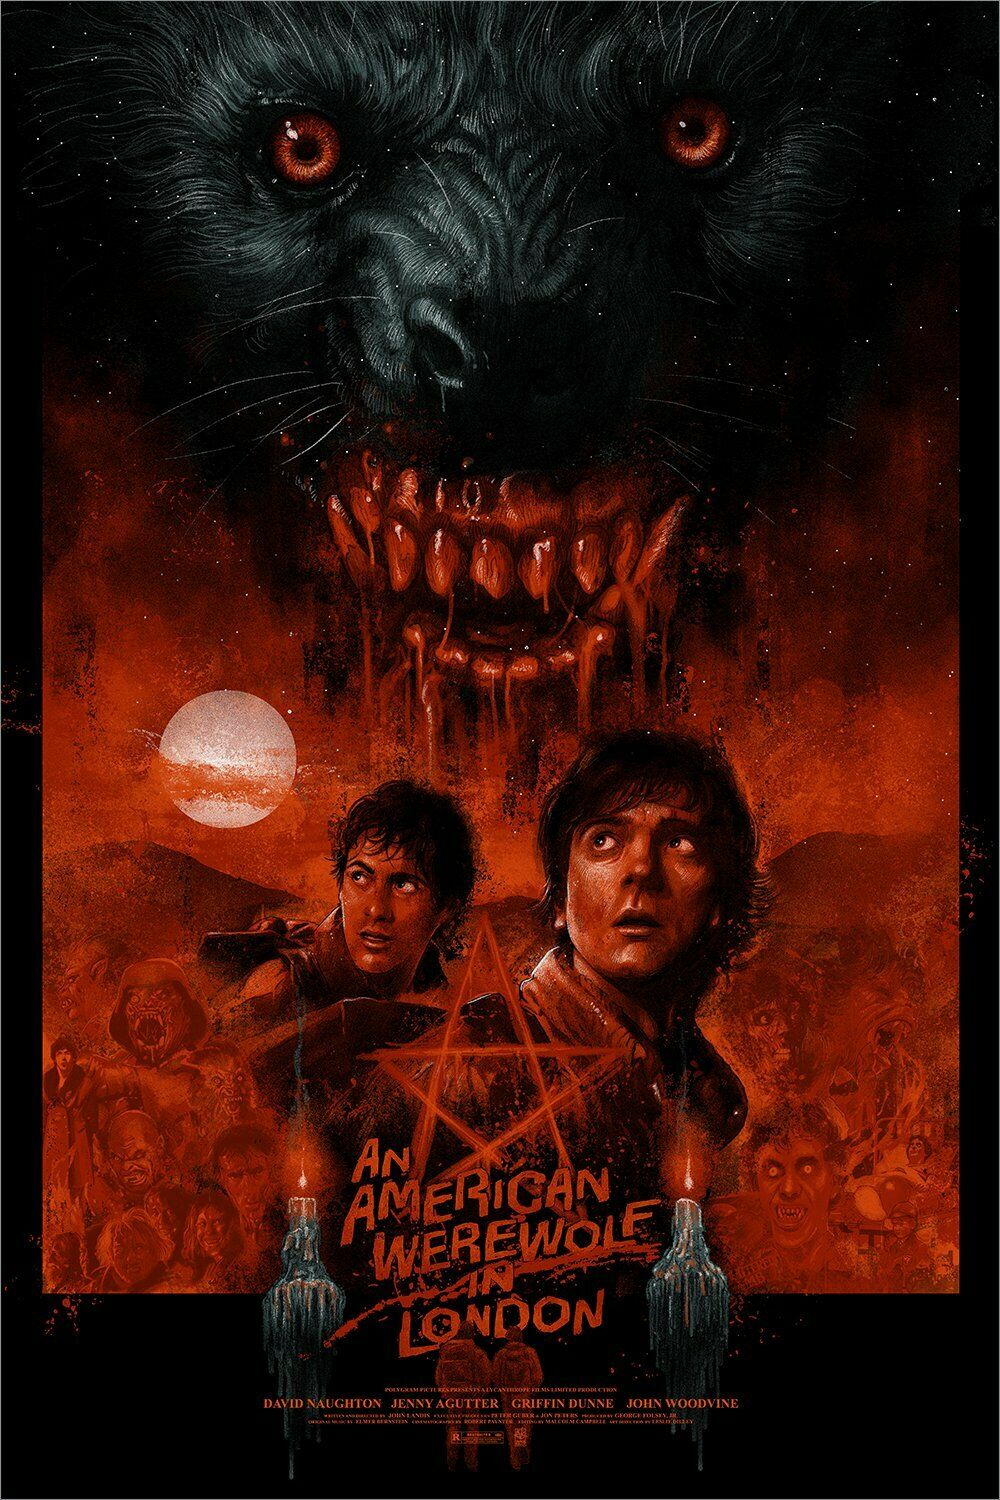 Super badass poster of American Werewolf in London movie featuring the two leads looking over their shoulders with the werewolf superimposed above the actors. So badass tbh. 